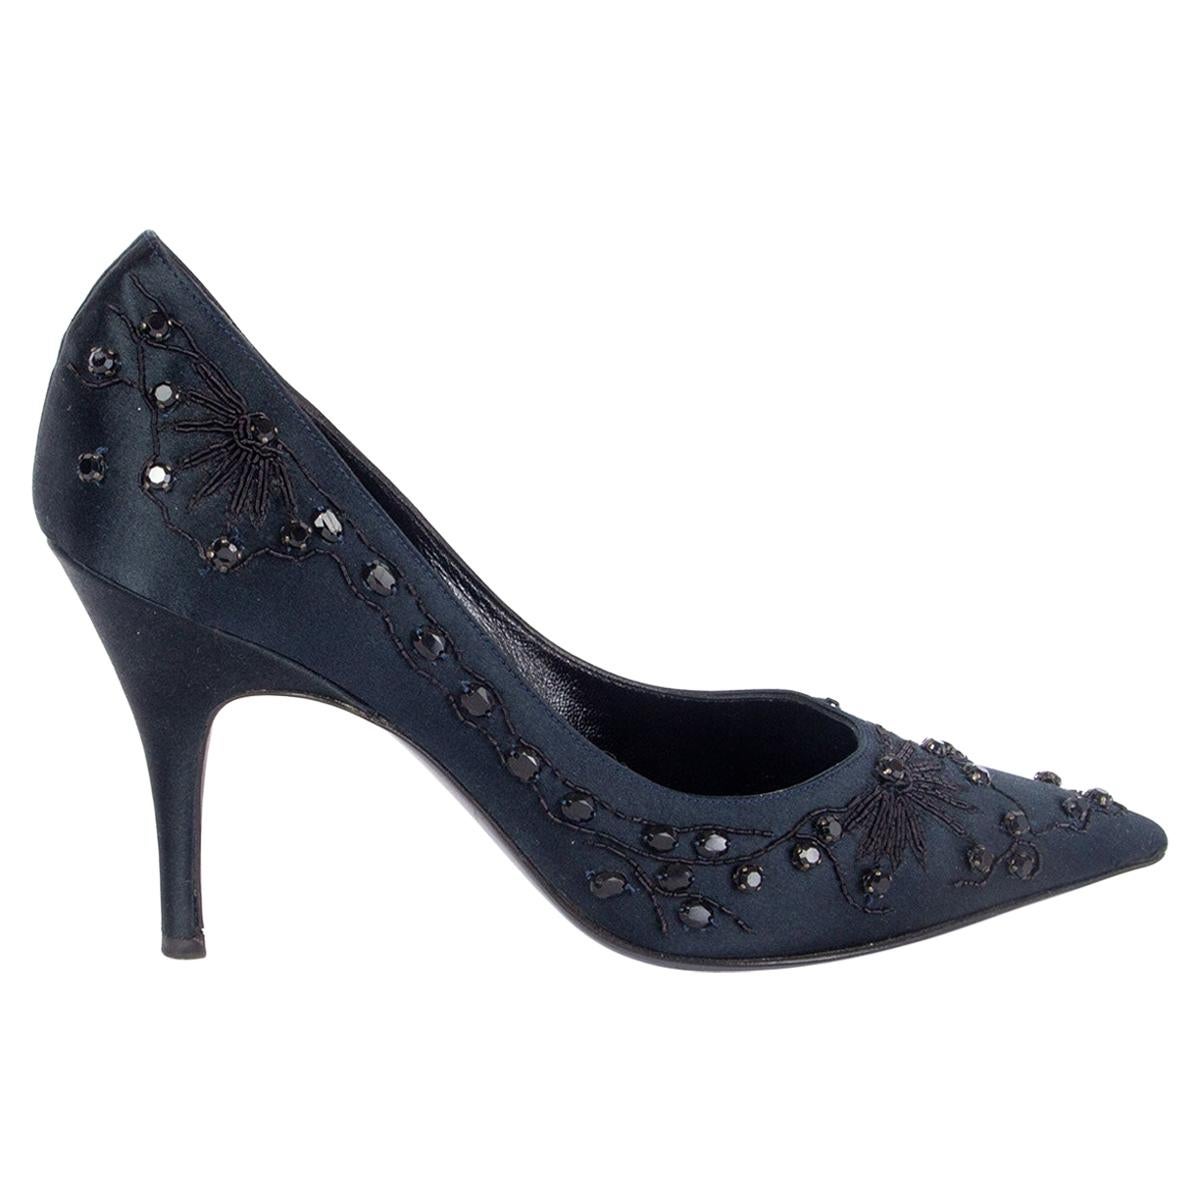 ALBERTA FERRETTI midnight blue EMBELLISHED SATIN Pointed-Toe Pumps Shoes 38 For Sale